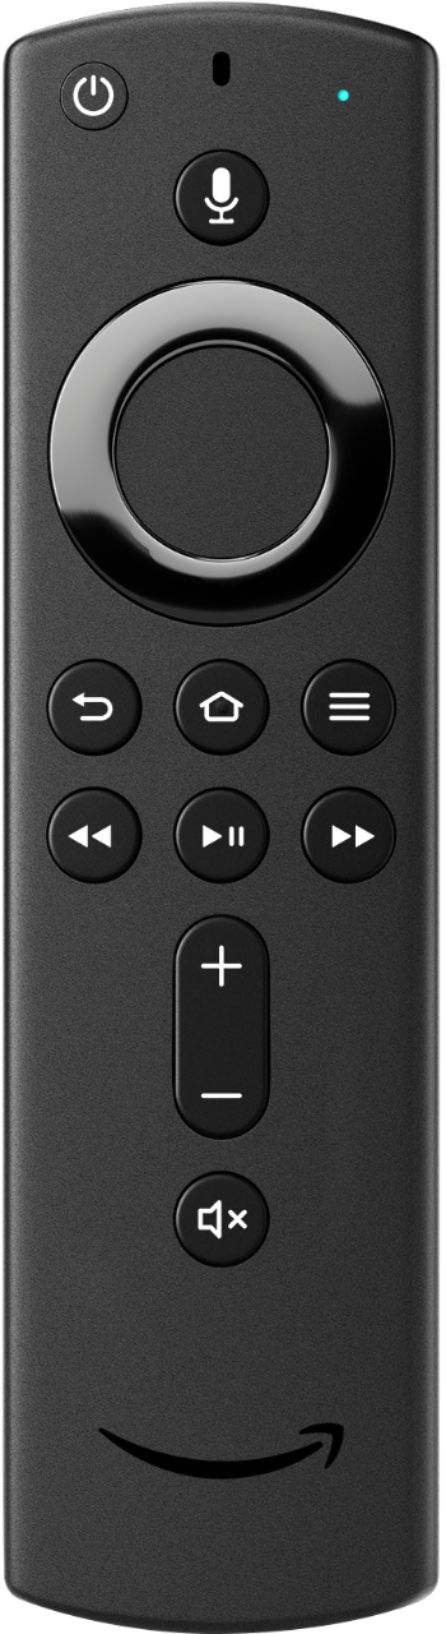 Best Buy:  Fire TV Stick with Alexa Voice Remote and controls  (includes TV controls)